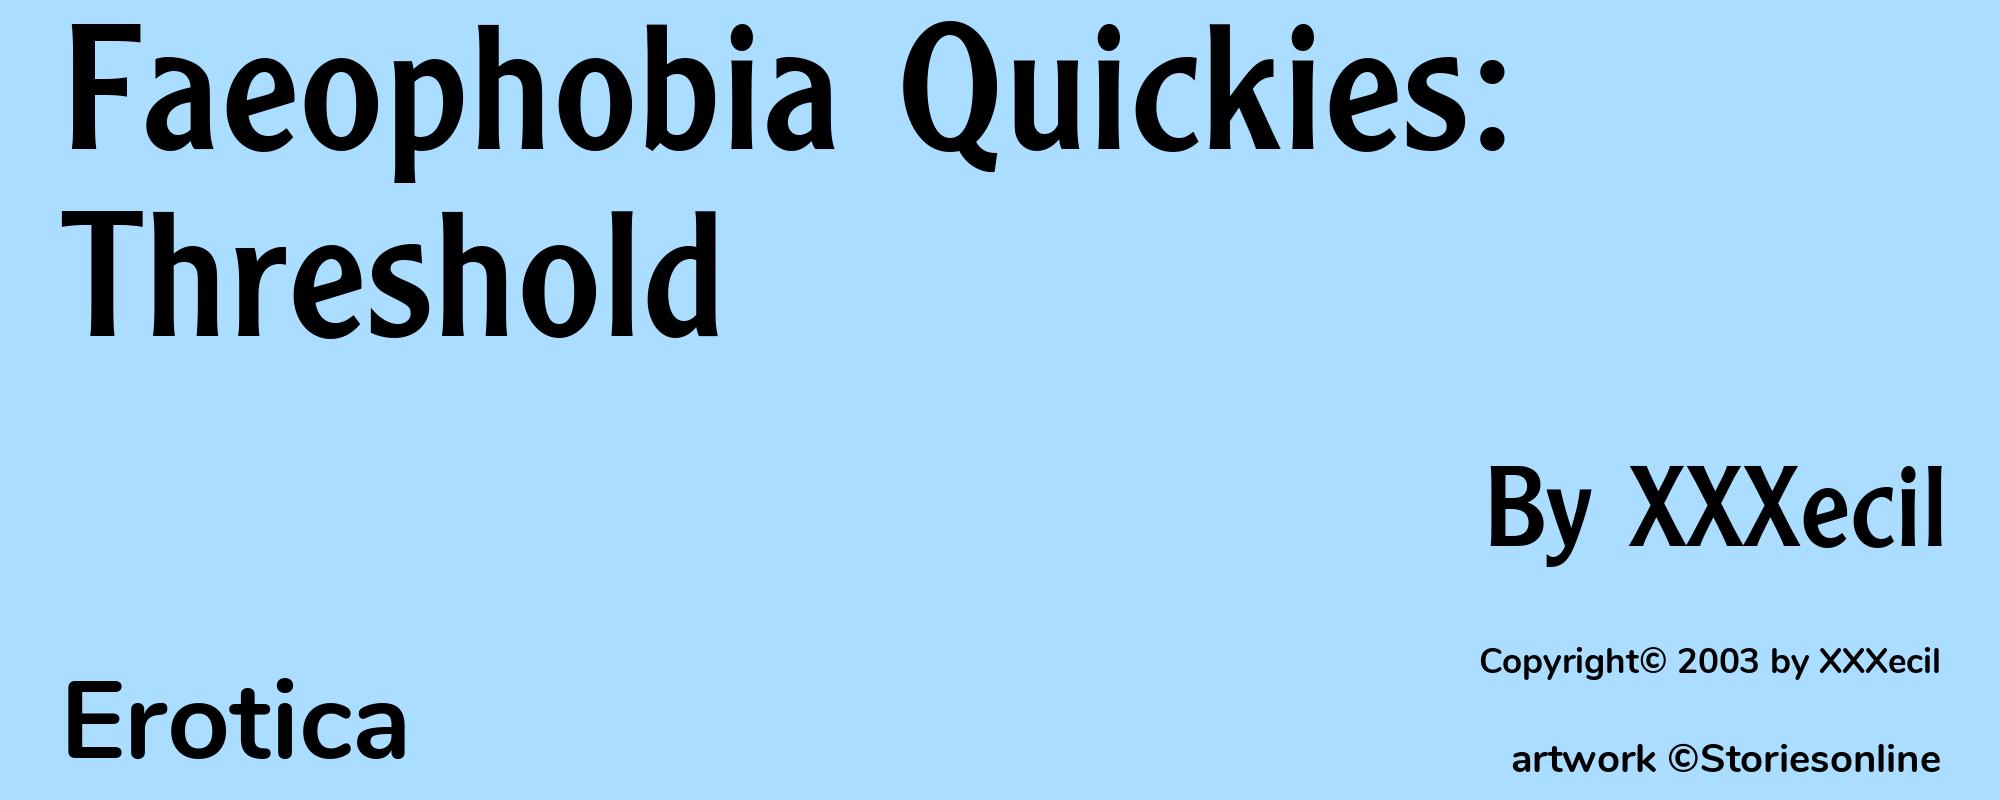 Faeophobia Quickies: Threshold - Cover